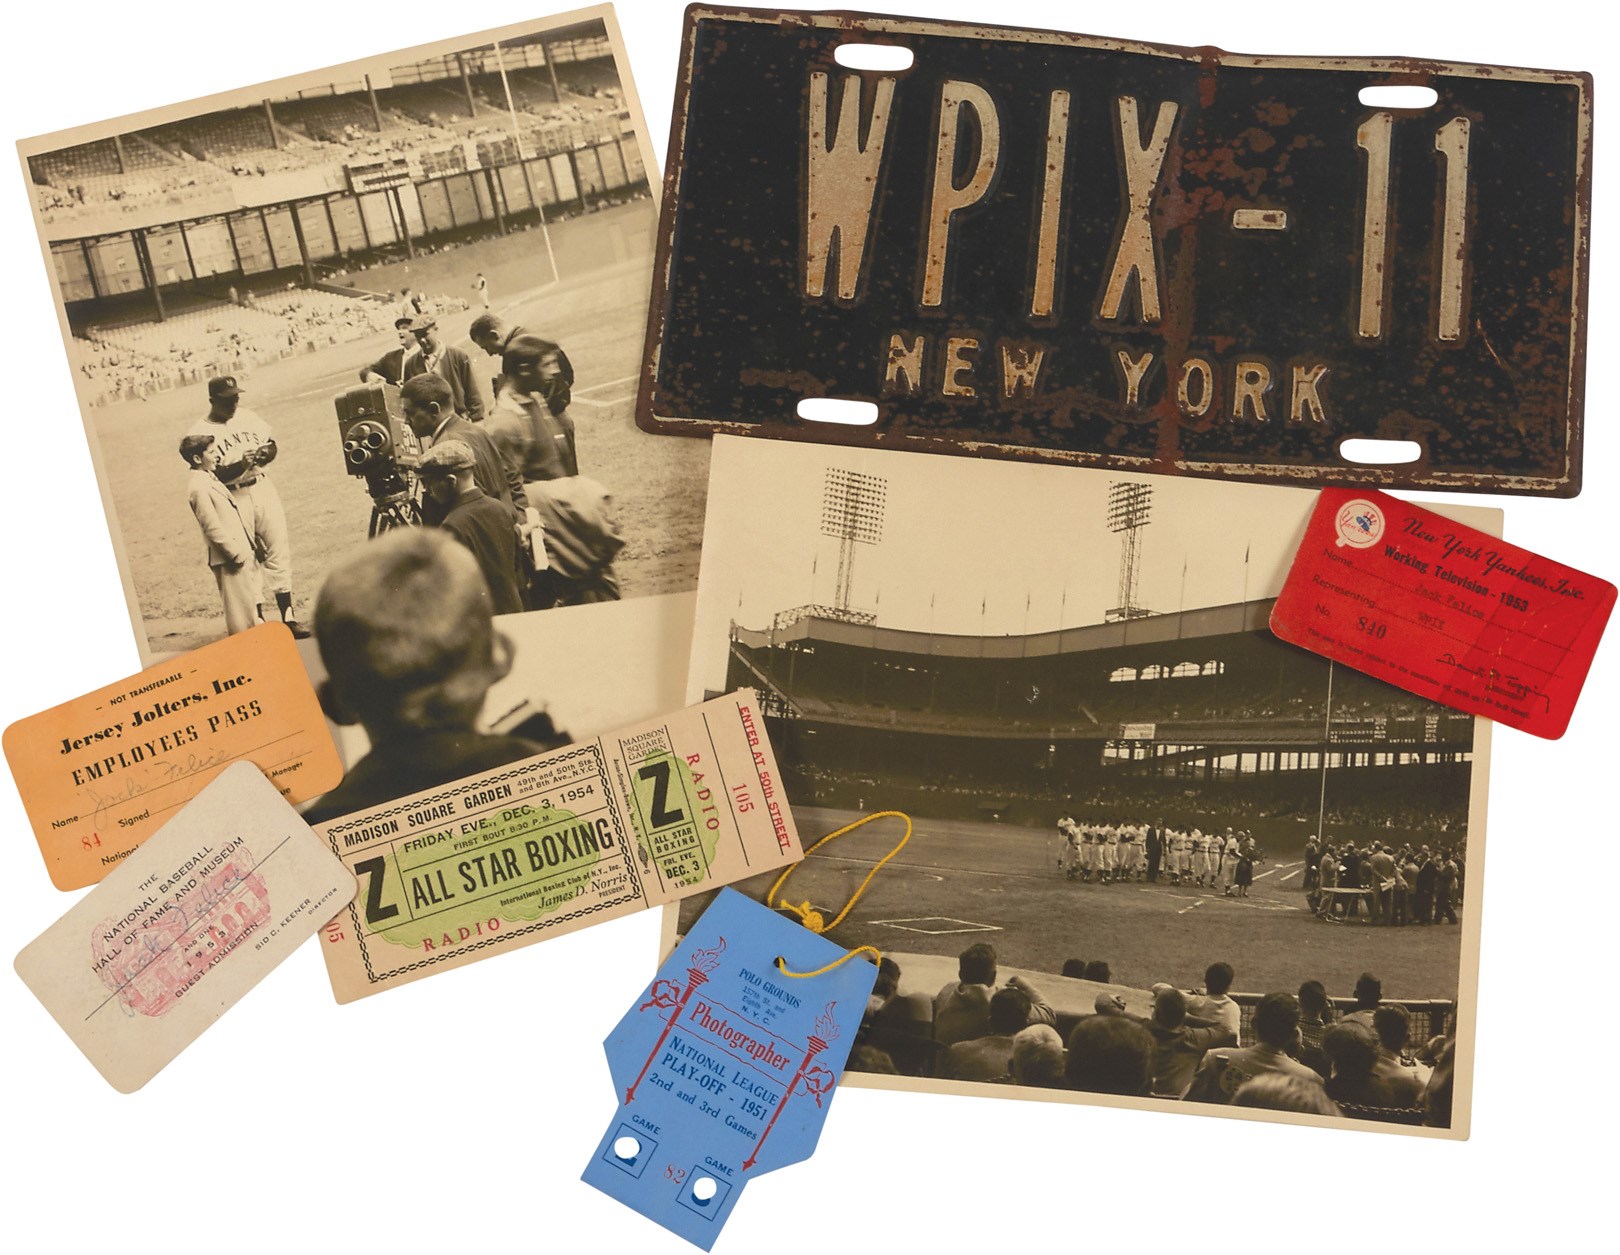 NY Yankees, Giants & Mets - 1950s NY Sports Ticket, Pass & Photo Collection - from WPIX 11 Emmy Winner